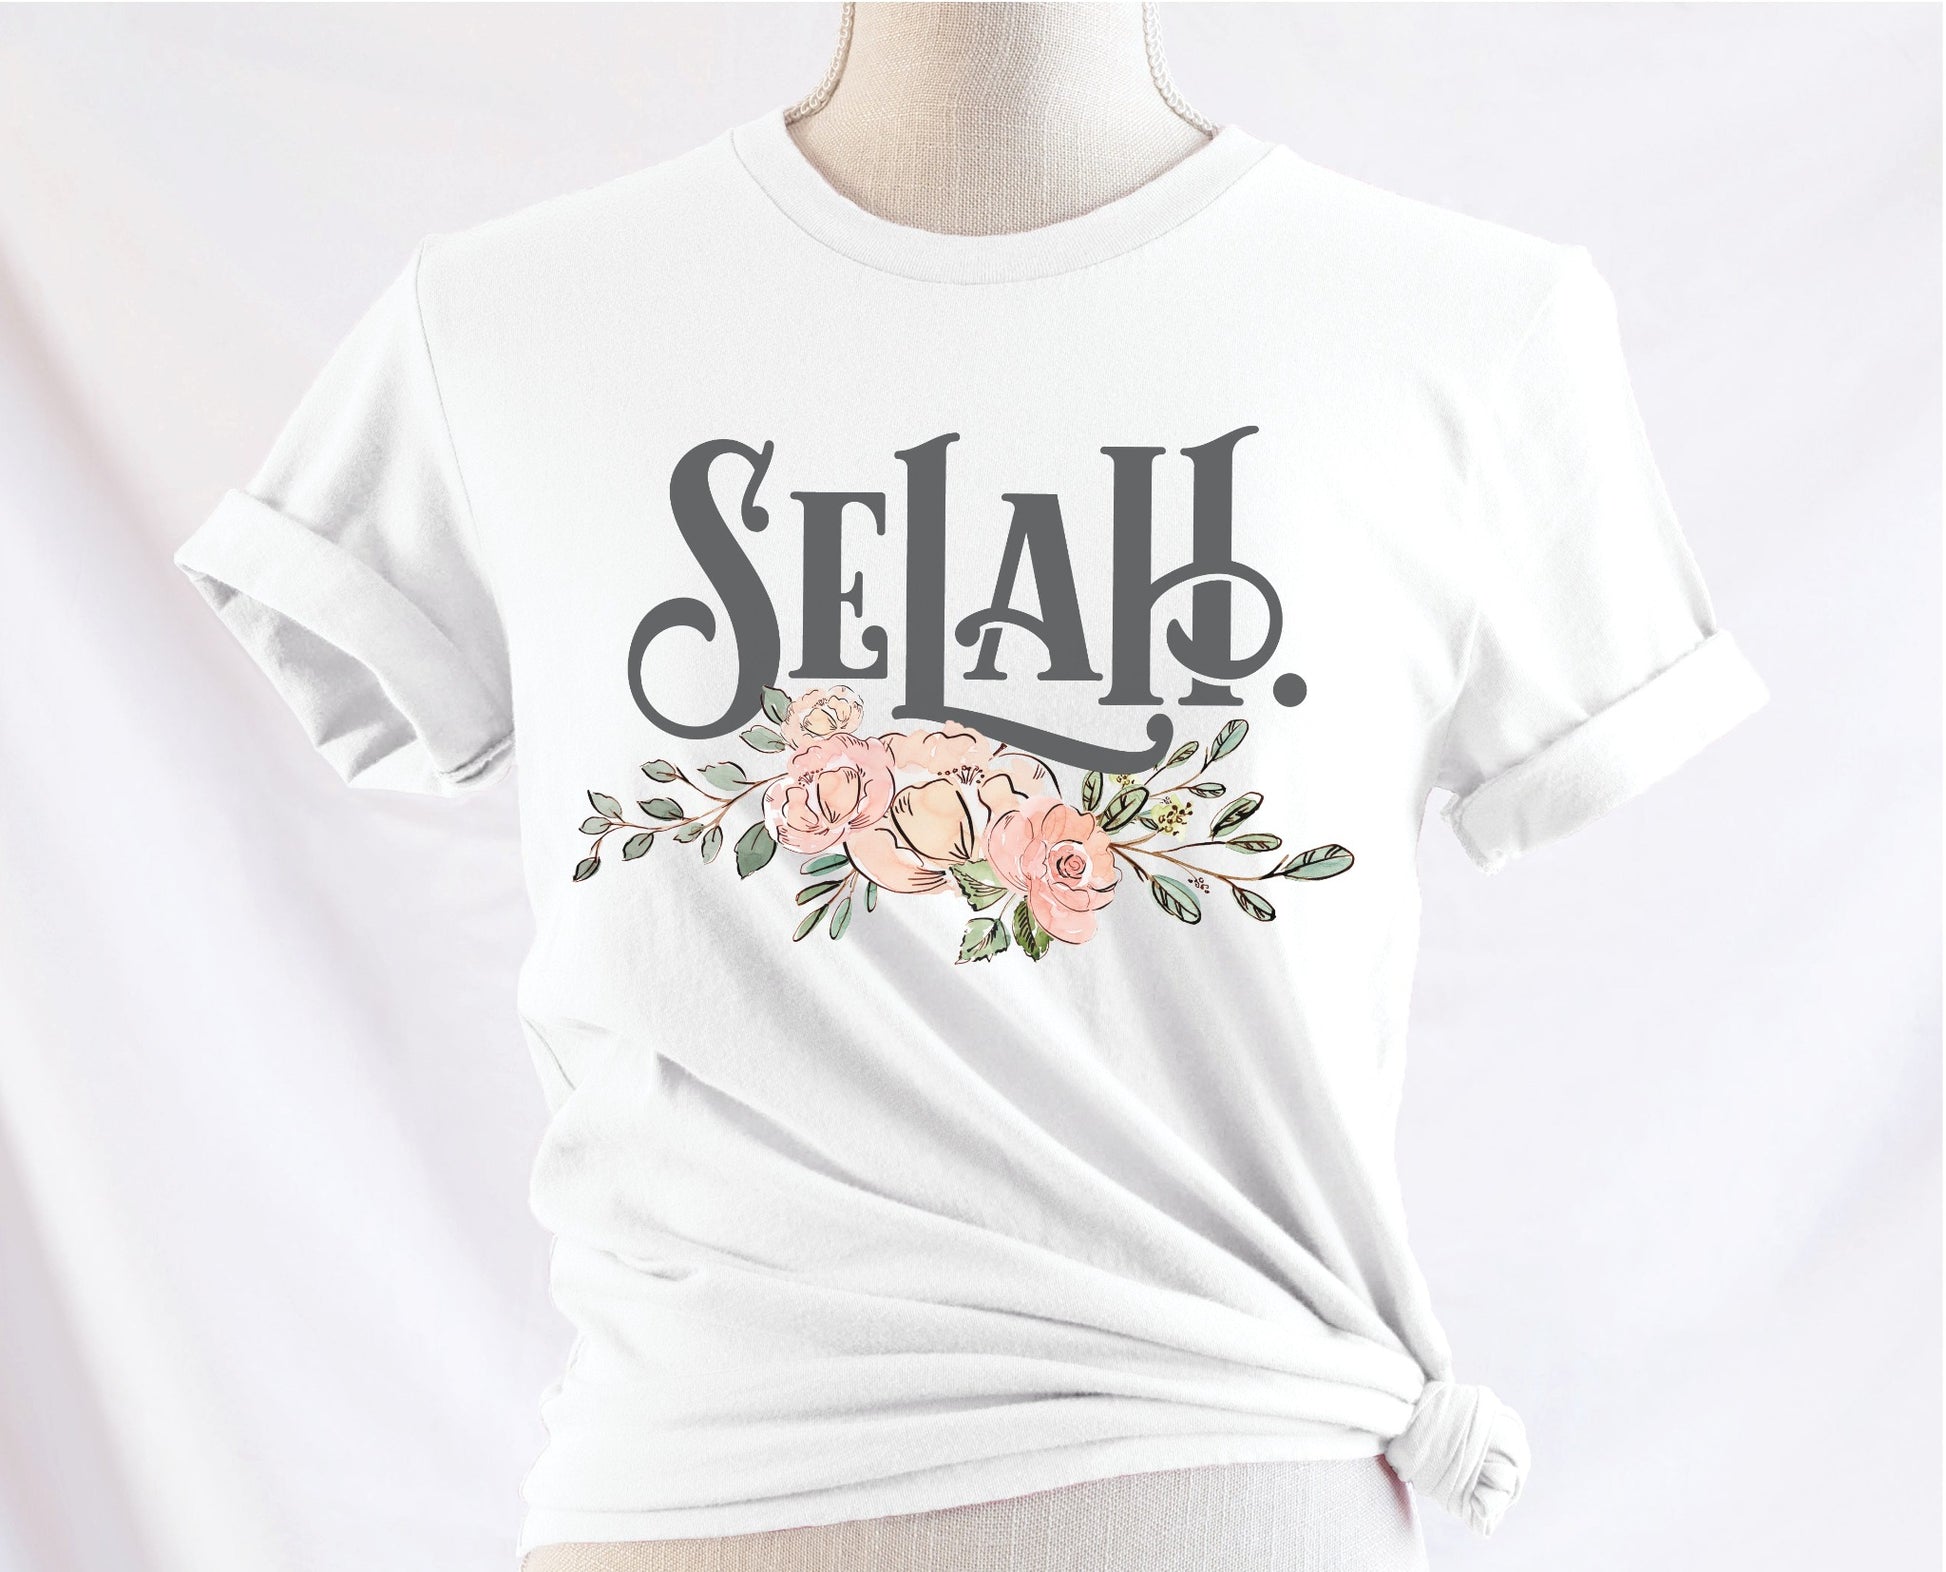 Selah Psalm bible verse watercolor floral Christian aesthetic design printed in charcoal gray, peach, blush pink, on soft white t-shirt for women